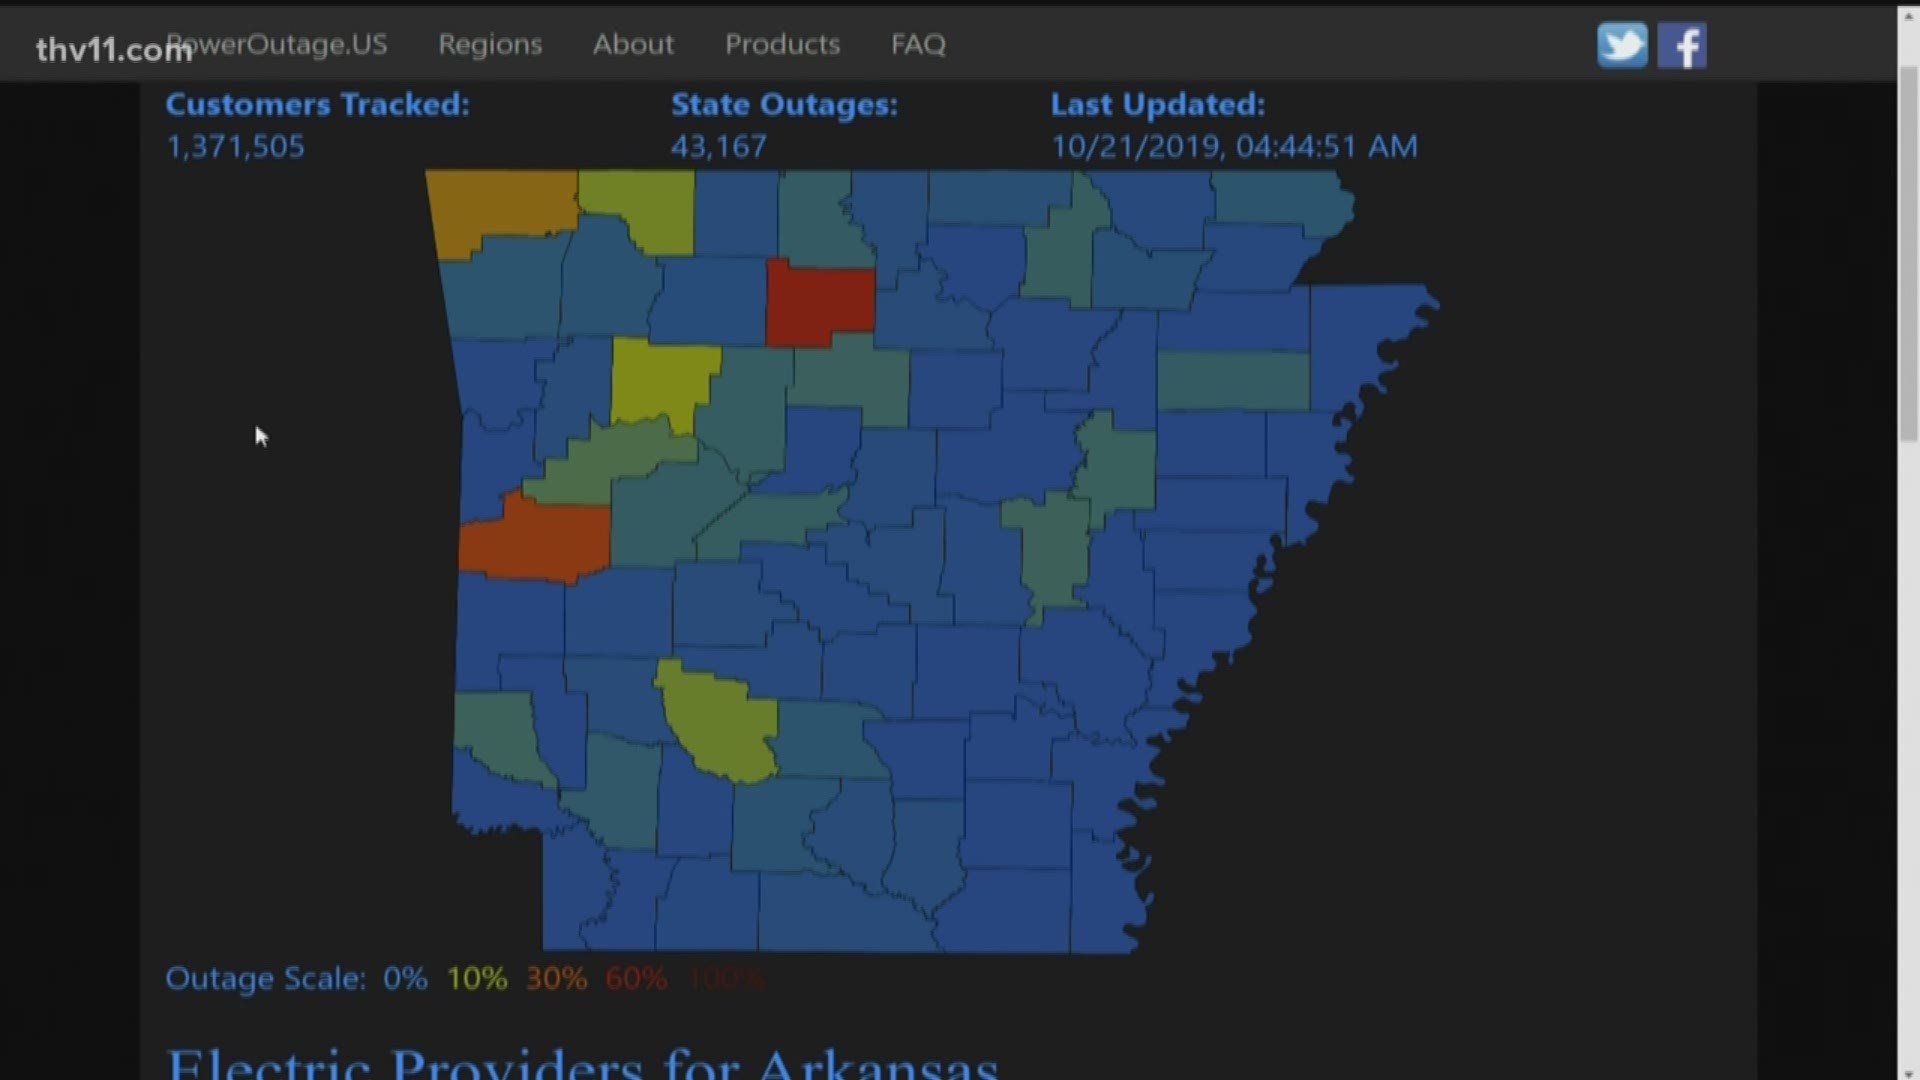 There are about 40,000 power outages in Arkansas  caused by overnight severe storms.